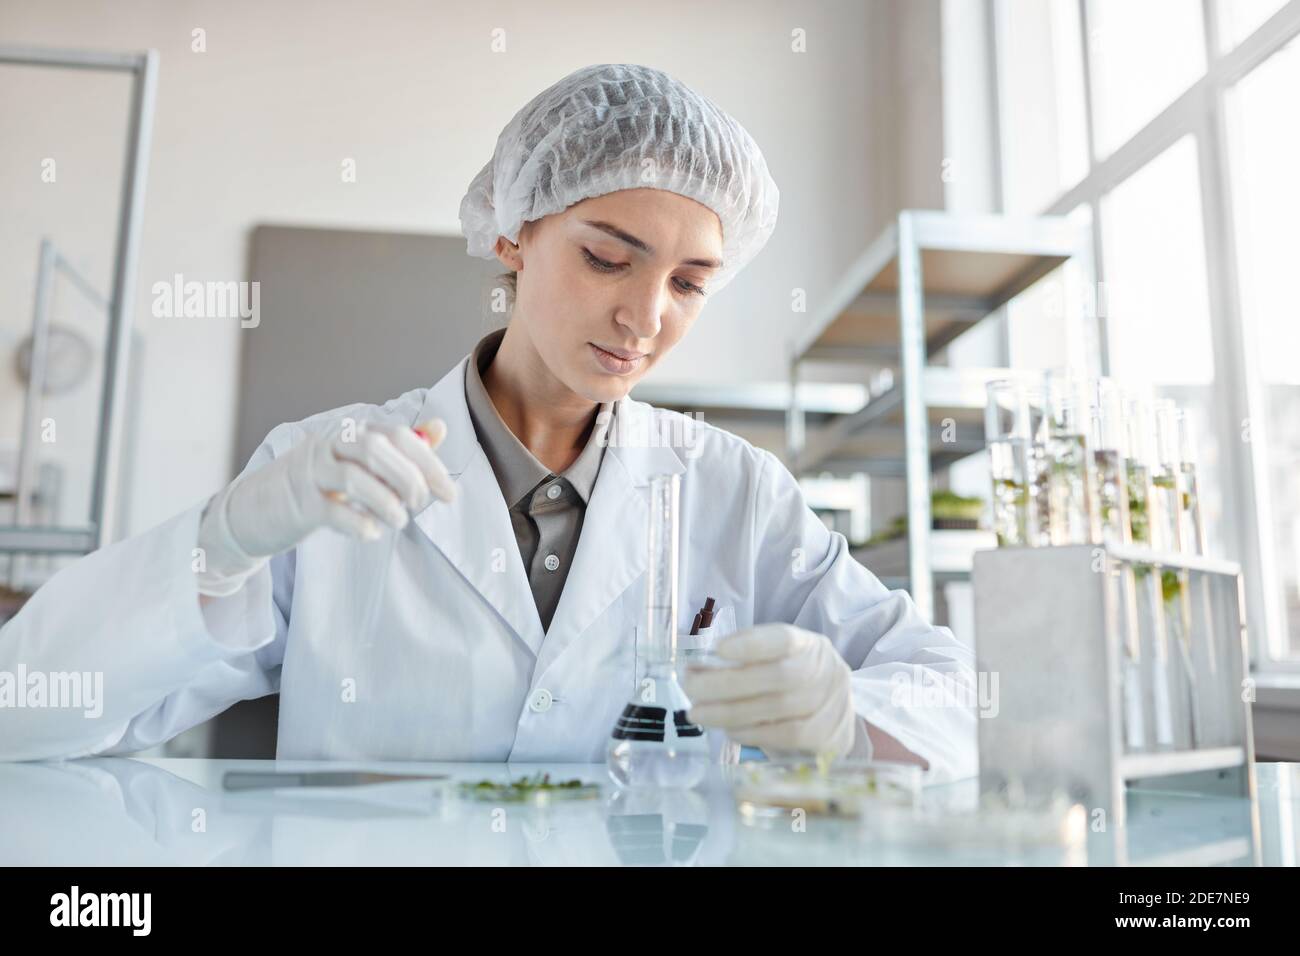 Front view portrait of young female scientist performing experiments with plant samples while working on research in biotechnology lab, copy space Stock Photo